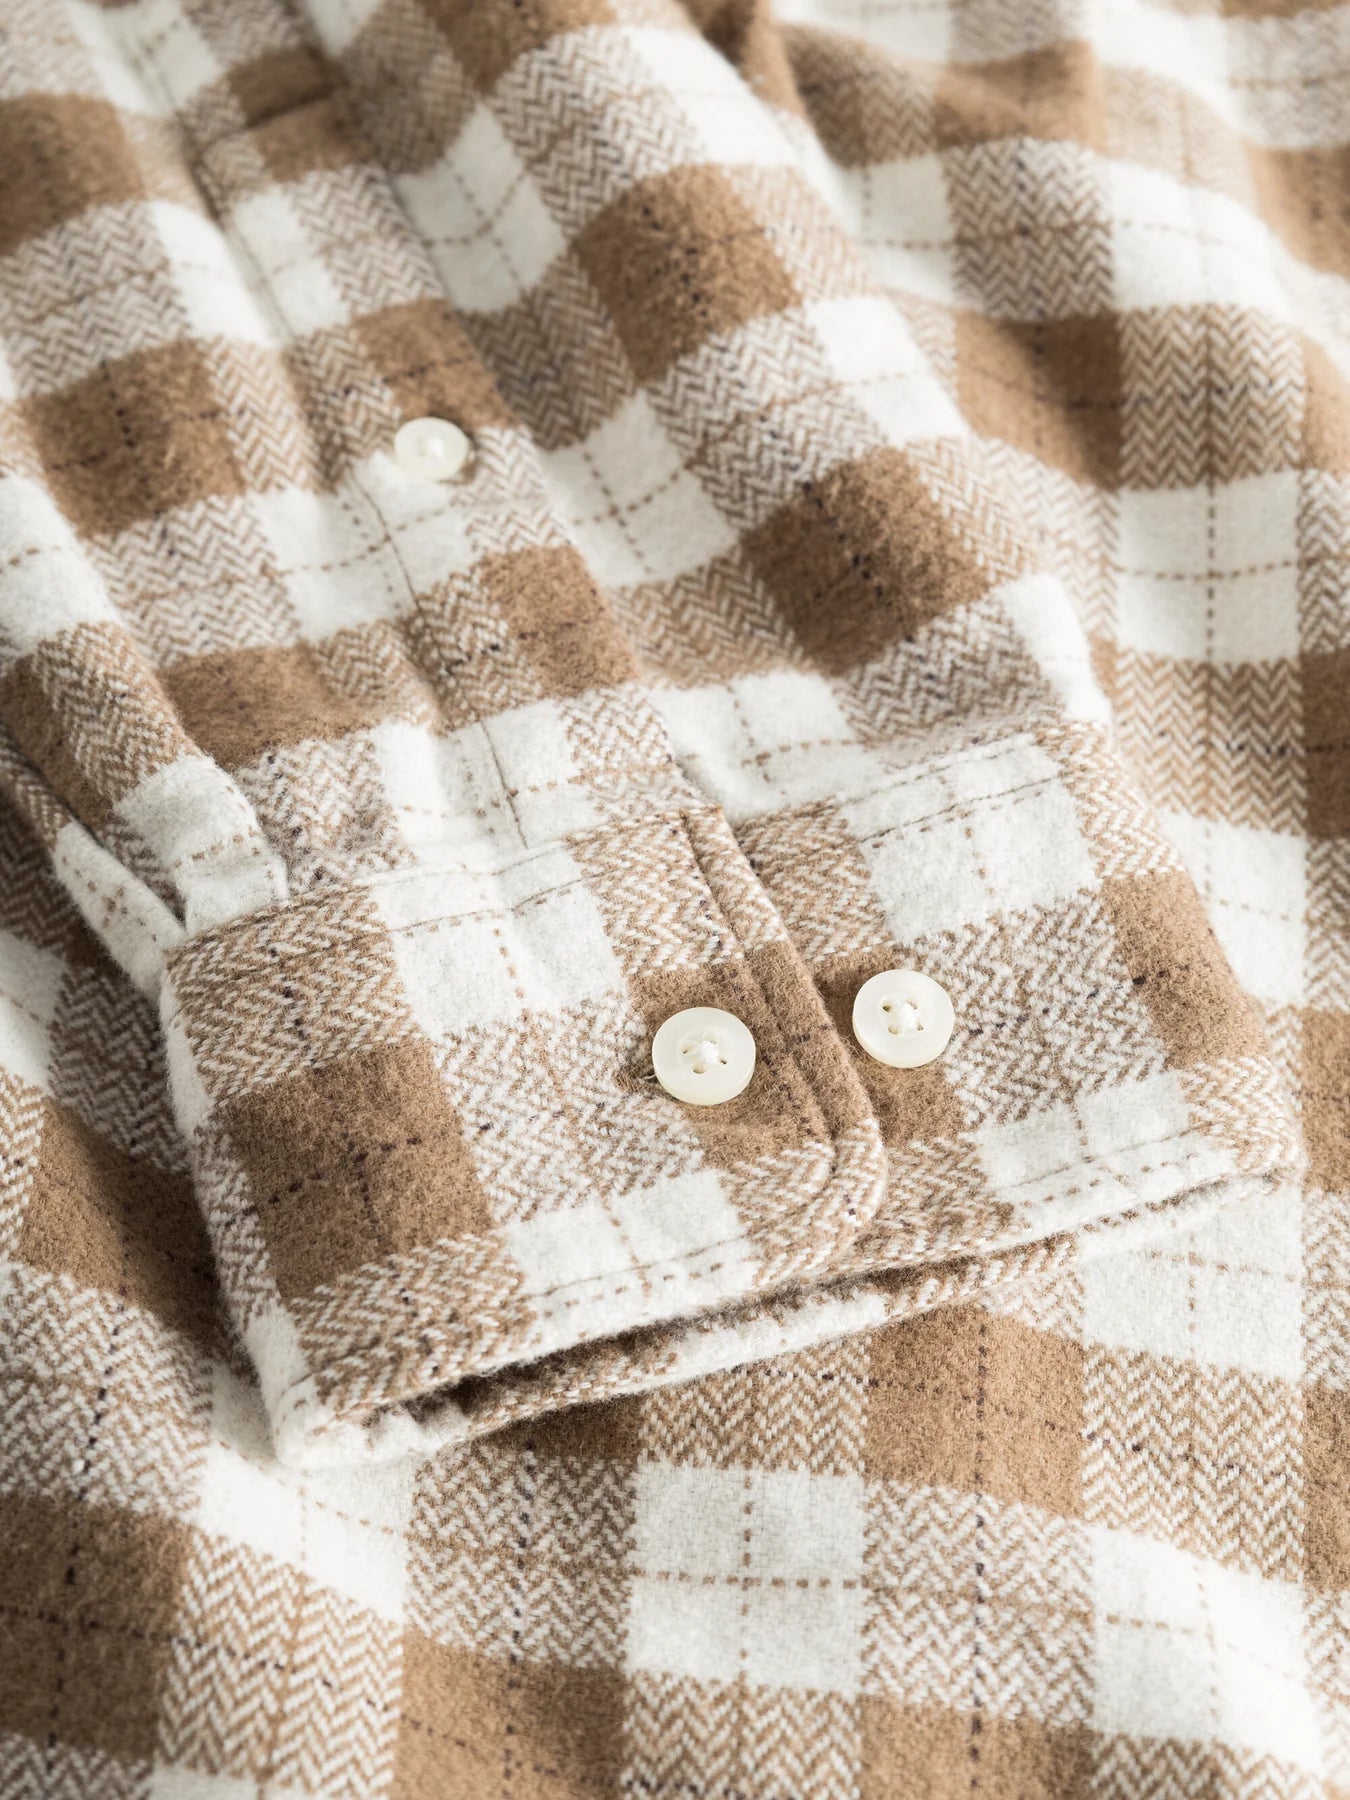 KnowledgeCotton Apparel M's Loose fit checkered shirt - 100% Organic Cotton Beige Check Shirt